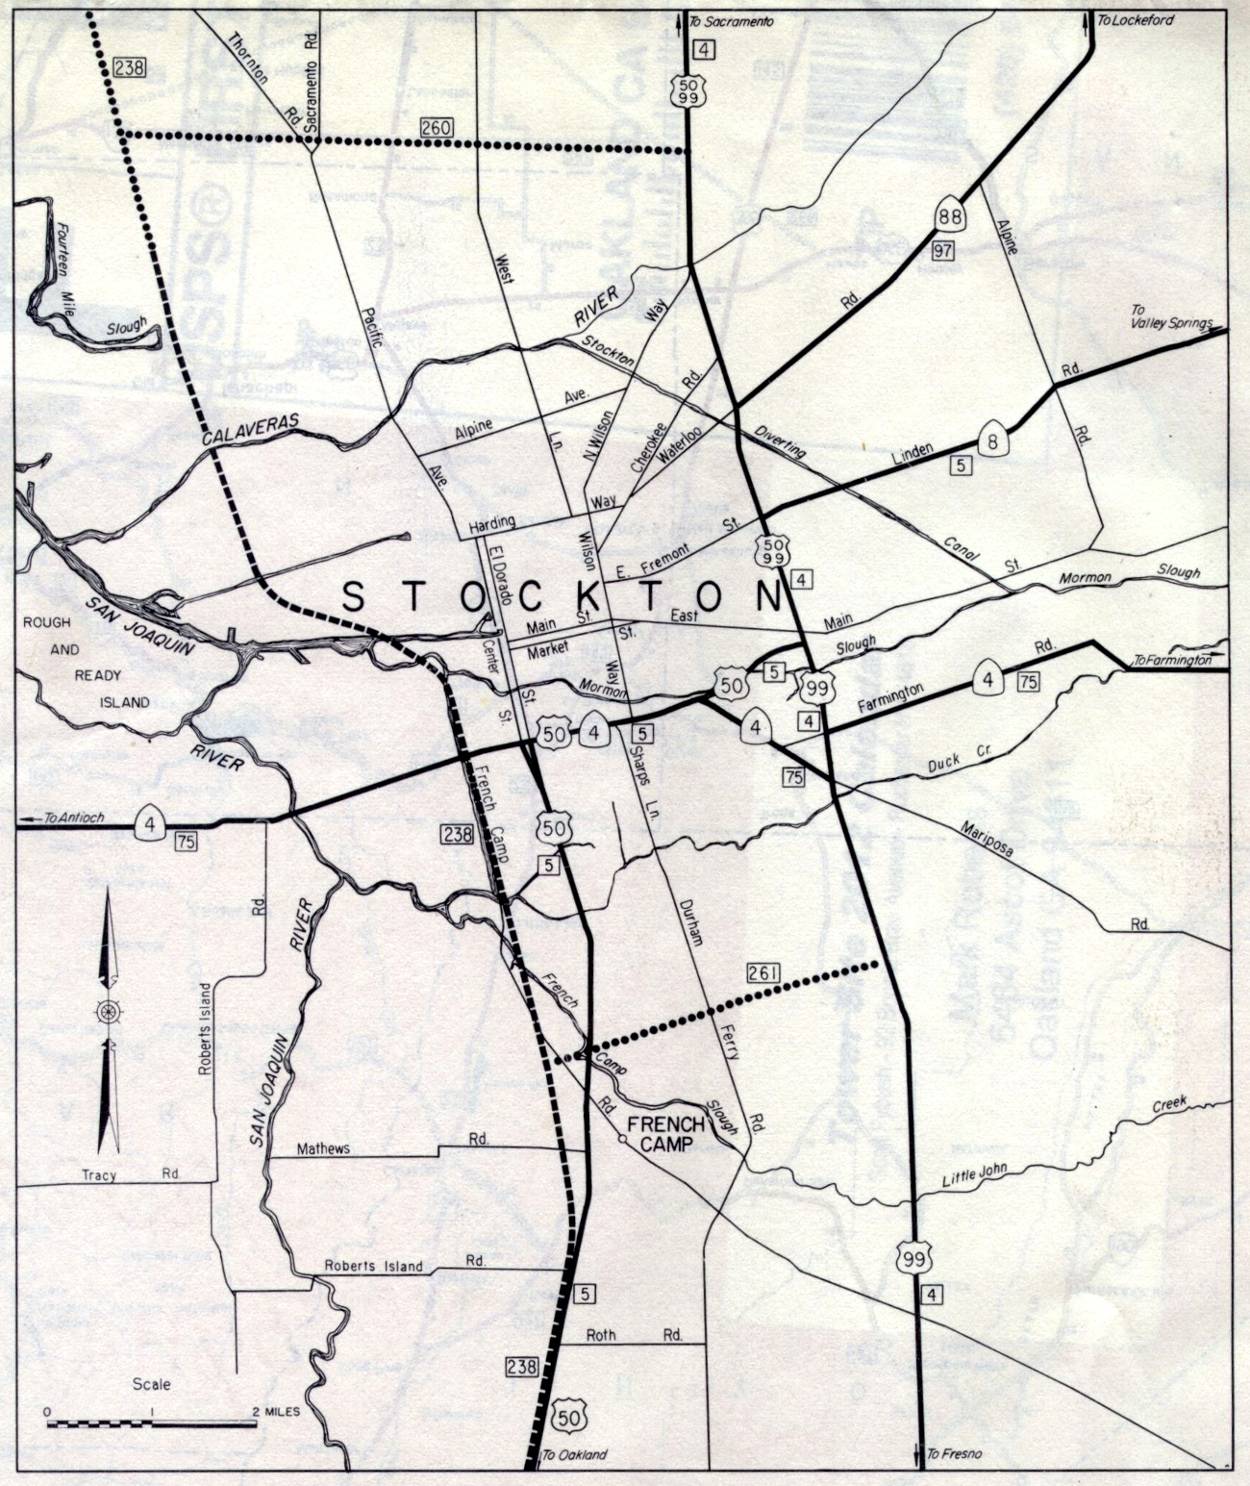 Detail map for Stockton on the 1961 California official highway map